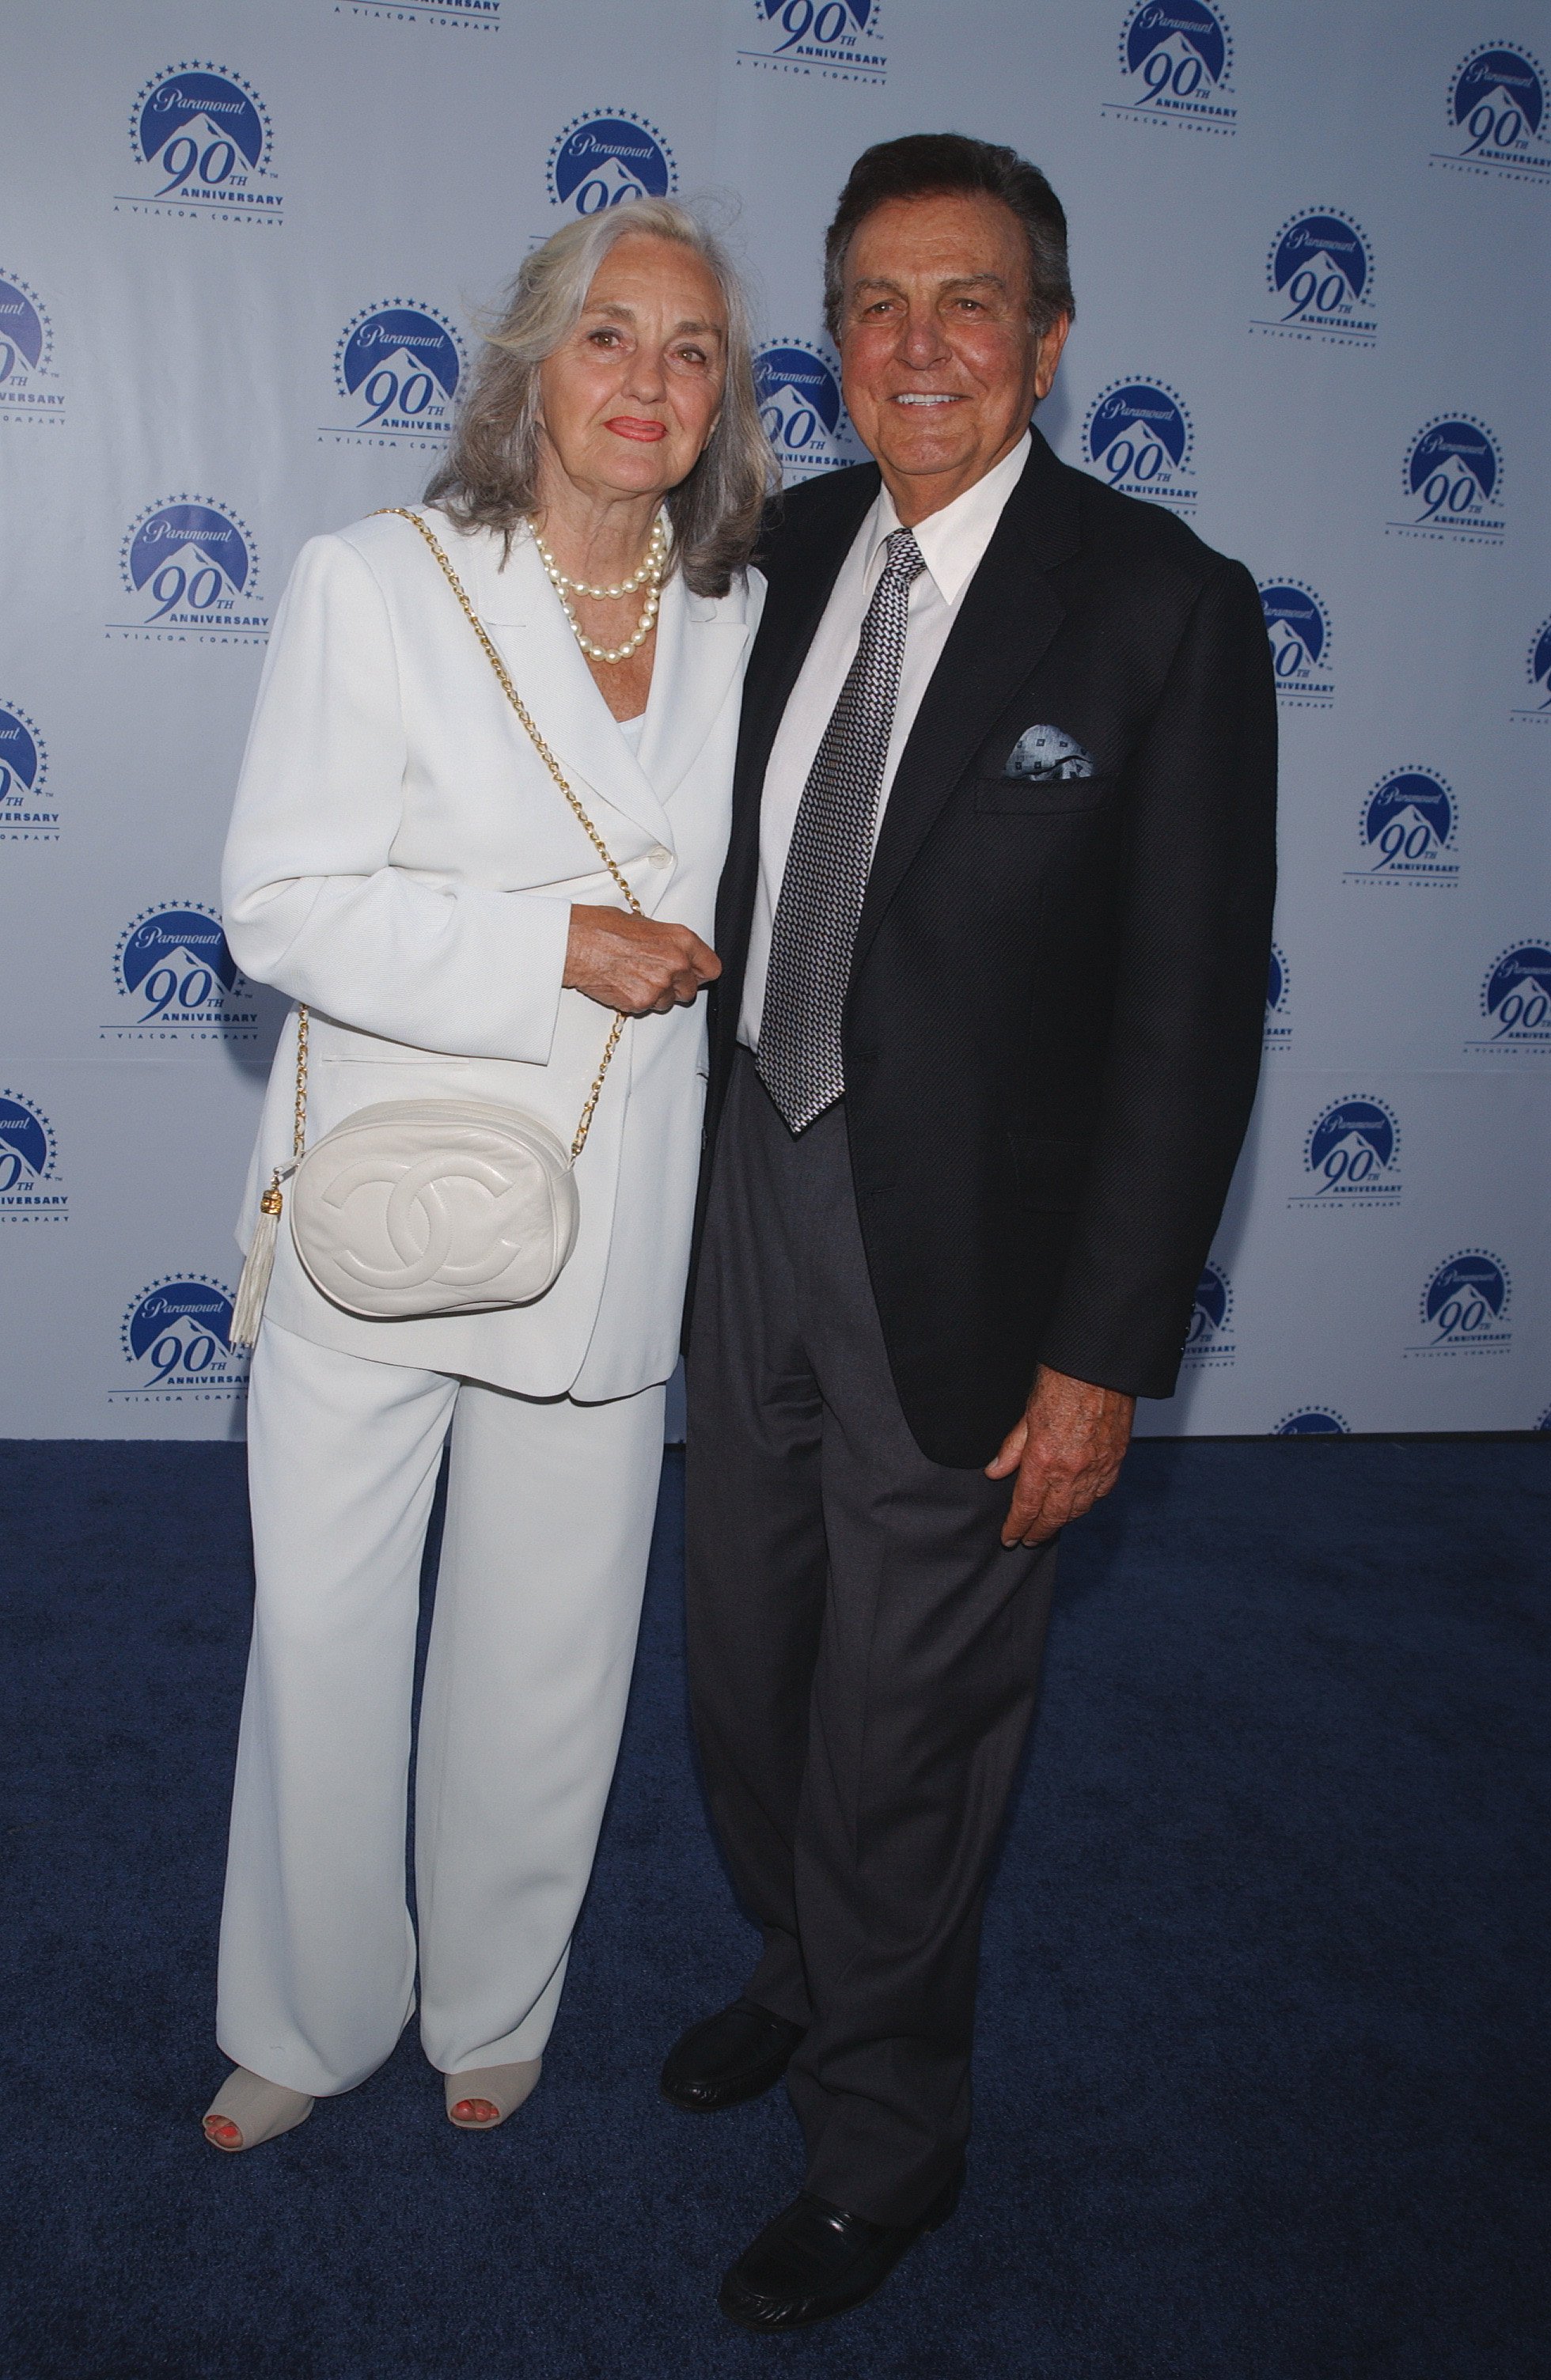 Actor Mike Connors and wife Mary Lou arriving at Paramount Pictures 90th Anniversary part on July 14 2002. | Source: Getty Images